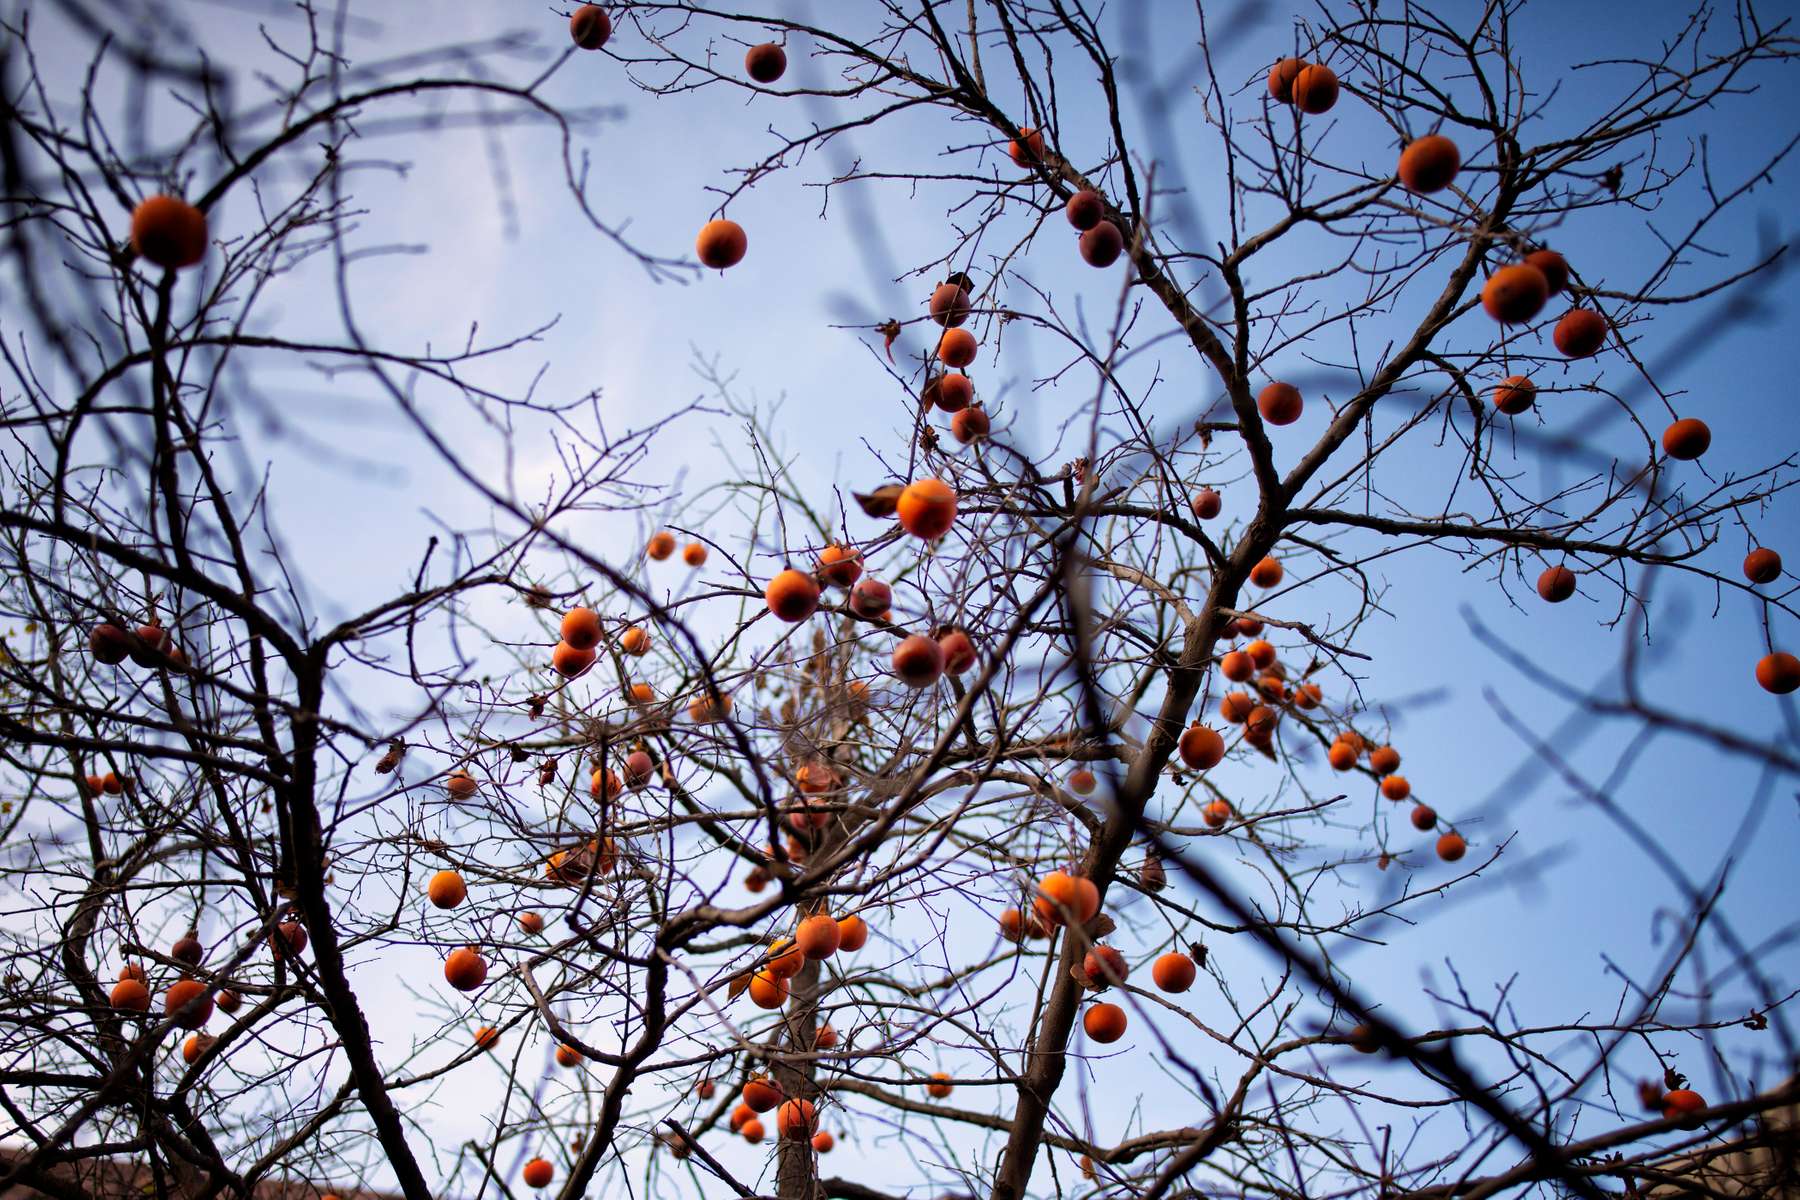 Late fall is persimmon season in Karabakh. In the aftermath of the war, the trees are heavy with the ripe, unpicked fruit. Since the end of the First Karabakh War in 1994, the self-proclaimed republic has remained unrecognized by any other country: status-less, a no man’s land to all but the people who inhabit its mountains, who till its fields, plant and harvest its orchards. Owing perhaps to the absence of an internationally recognized political status, and undeniably to the fact that so many Karabakhi Armenians live off the land, their connection to the soil runs deep. They live by a motto derived from the name of an iconic statue on a hilltop just outside of Stepanakert: We are our mountains. Now, with so many of those mountains within plain sight but out of reach, they are left to wonder: Without our mountains, what are we? What is left of us? 